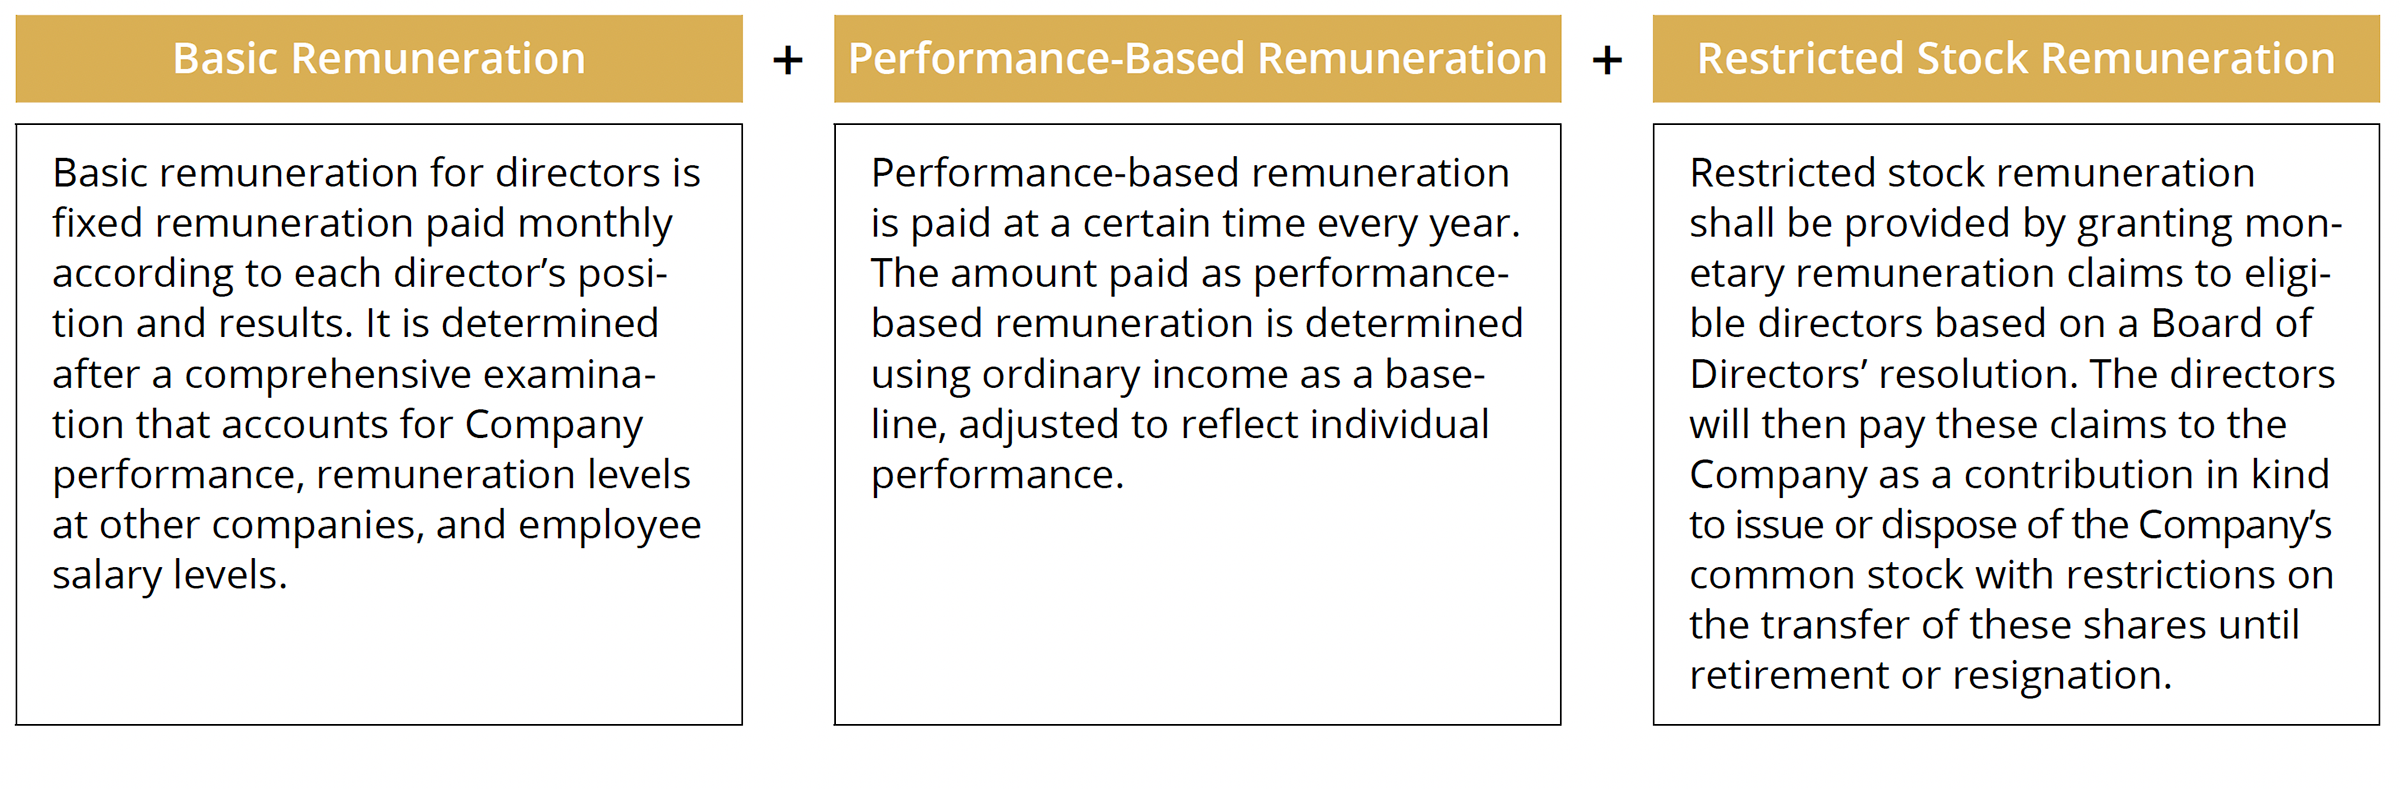 Composition of Remuneration for Directors